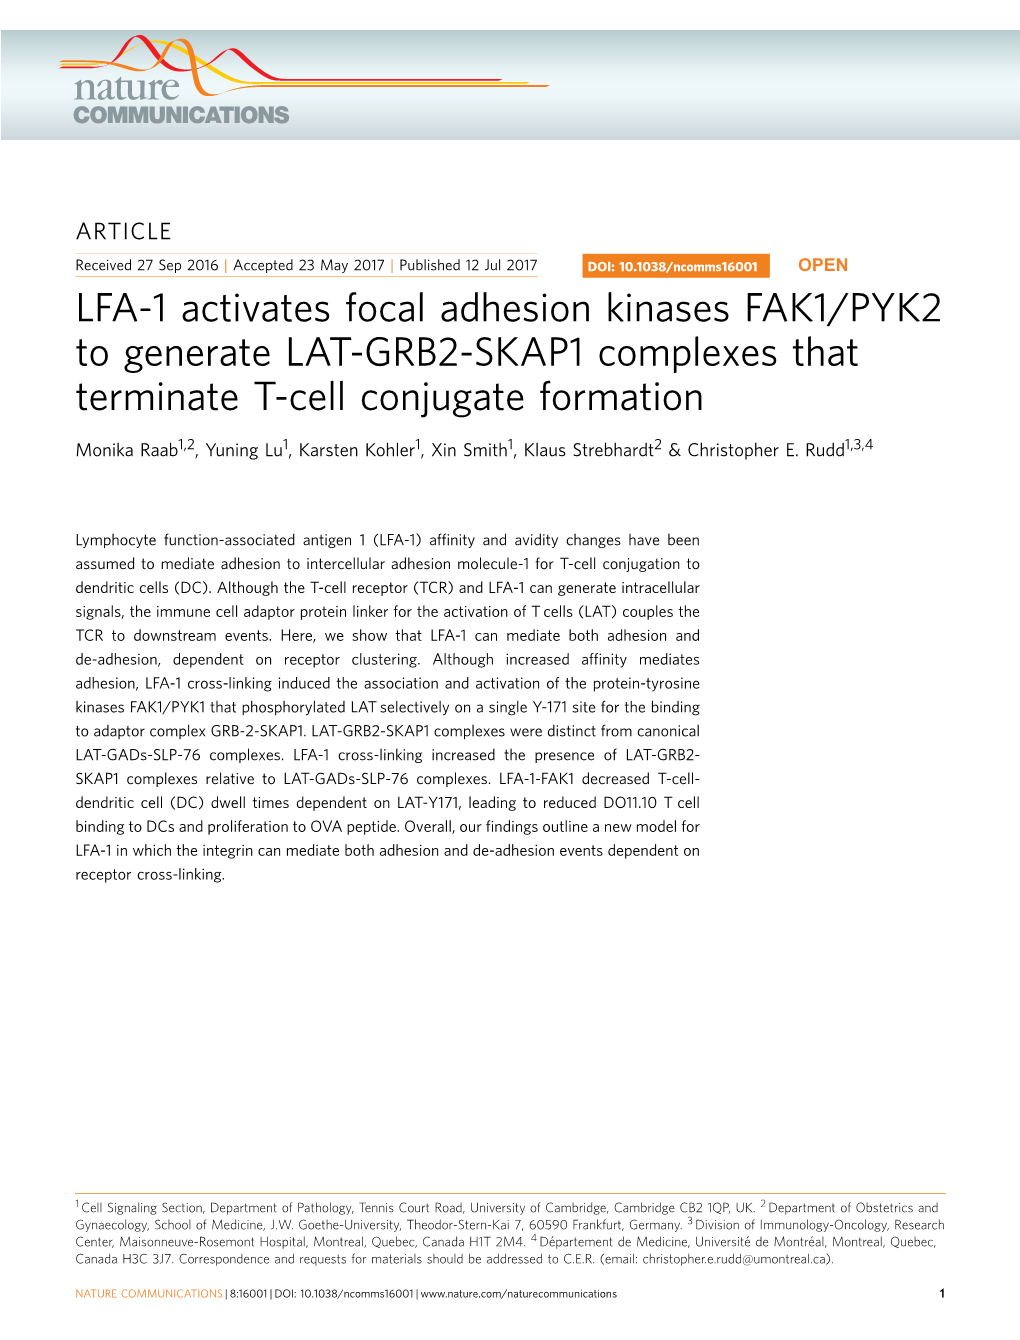 LFA-1 Activates Focal Adhesion Kinases FAK1/PYK2 to Generate LAT-GRB2-SKAP1 Complexes That Terminate T-Cell Conjugate Formation